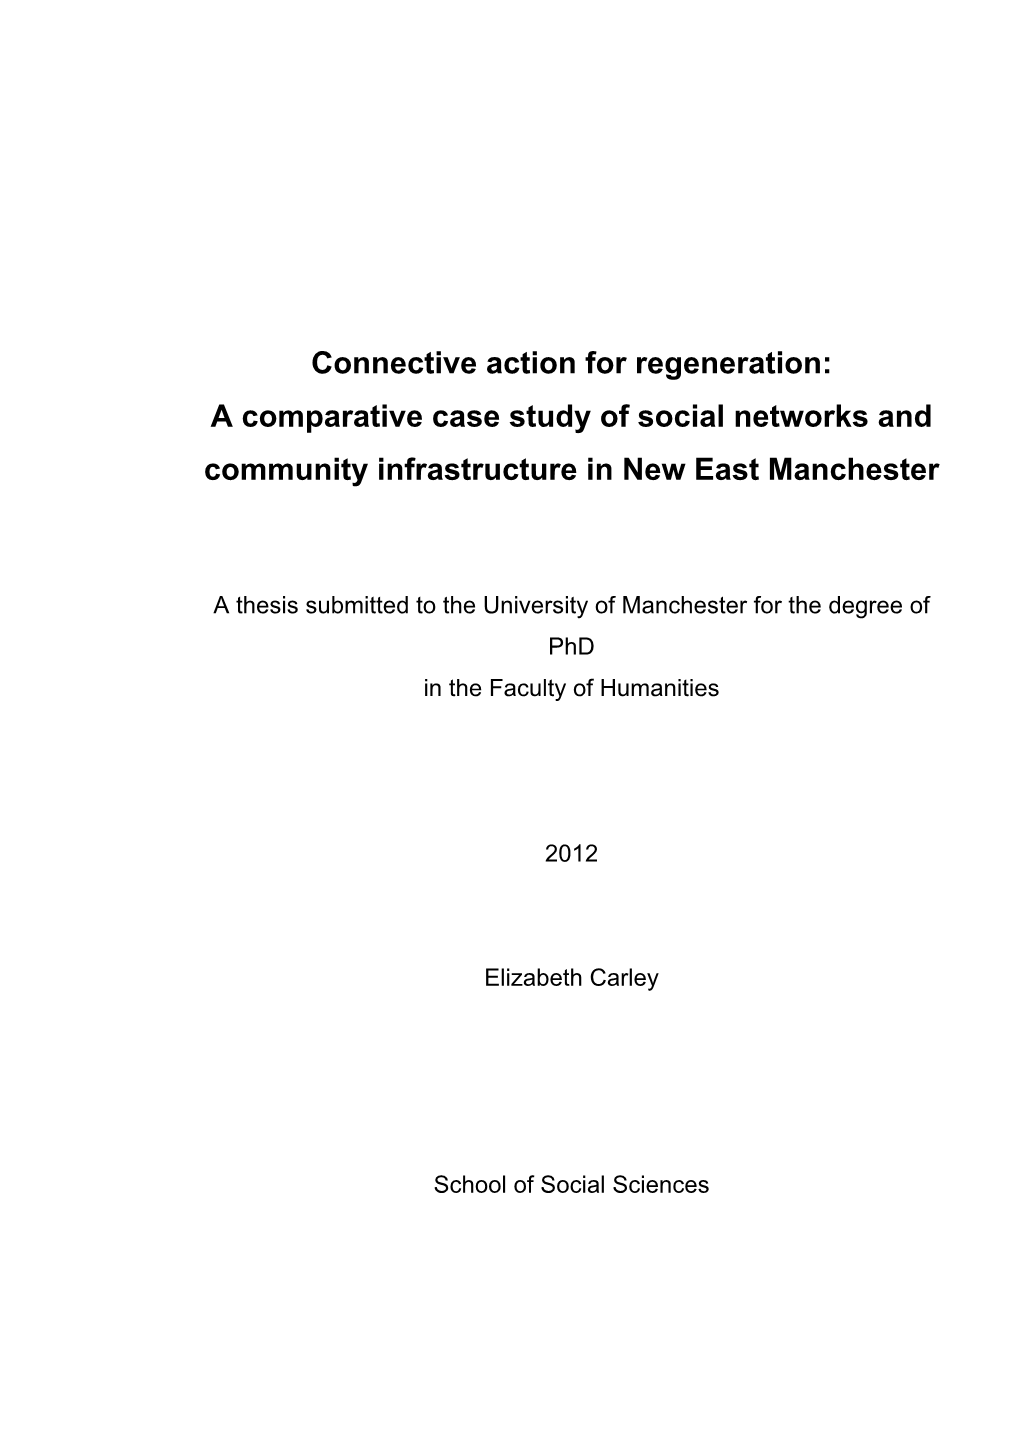 Connective Action for Regeneration: a Comparative Case Study of Social Networks and Community Infrastructure in New East Manchester